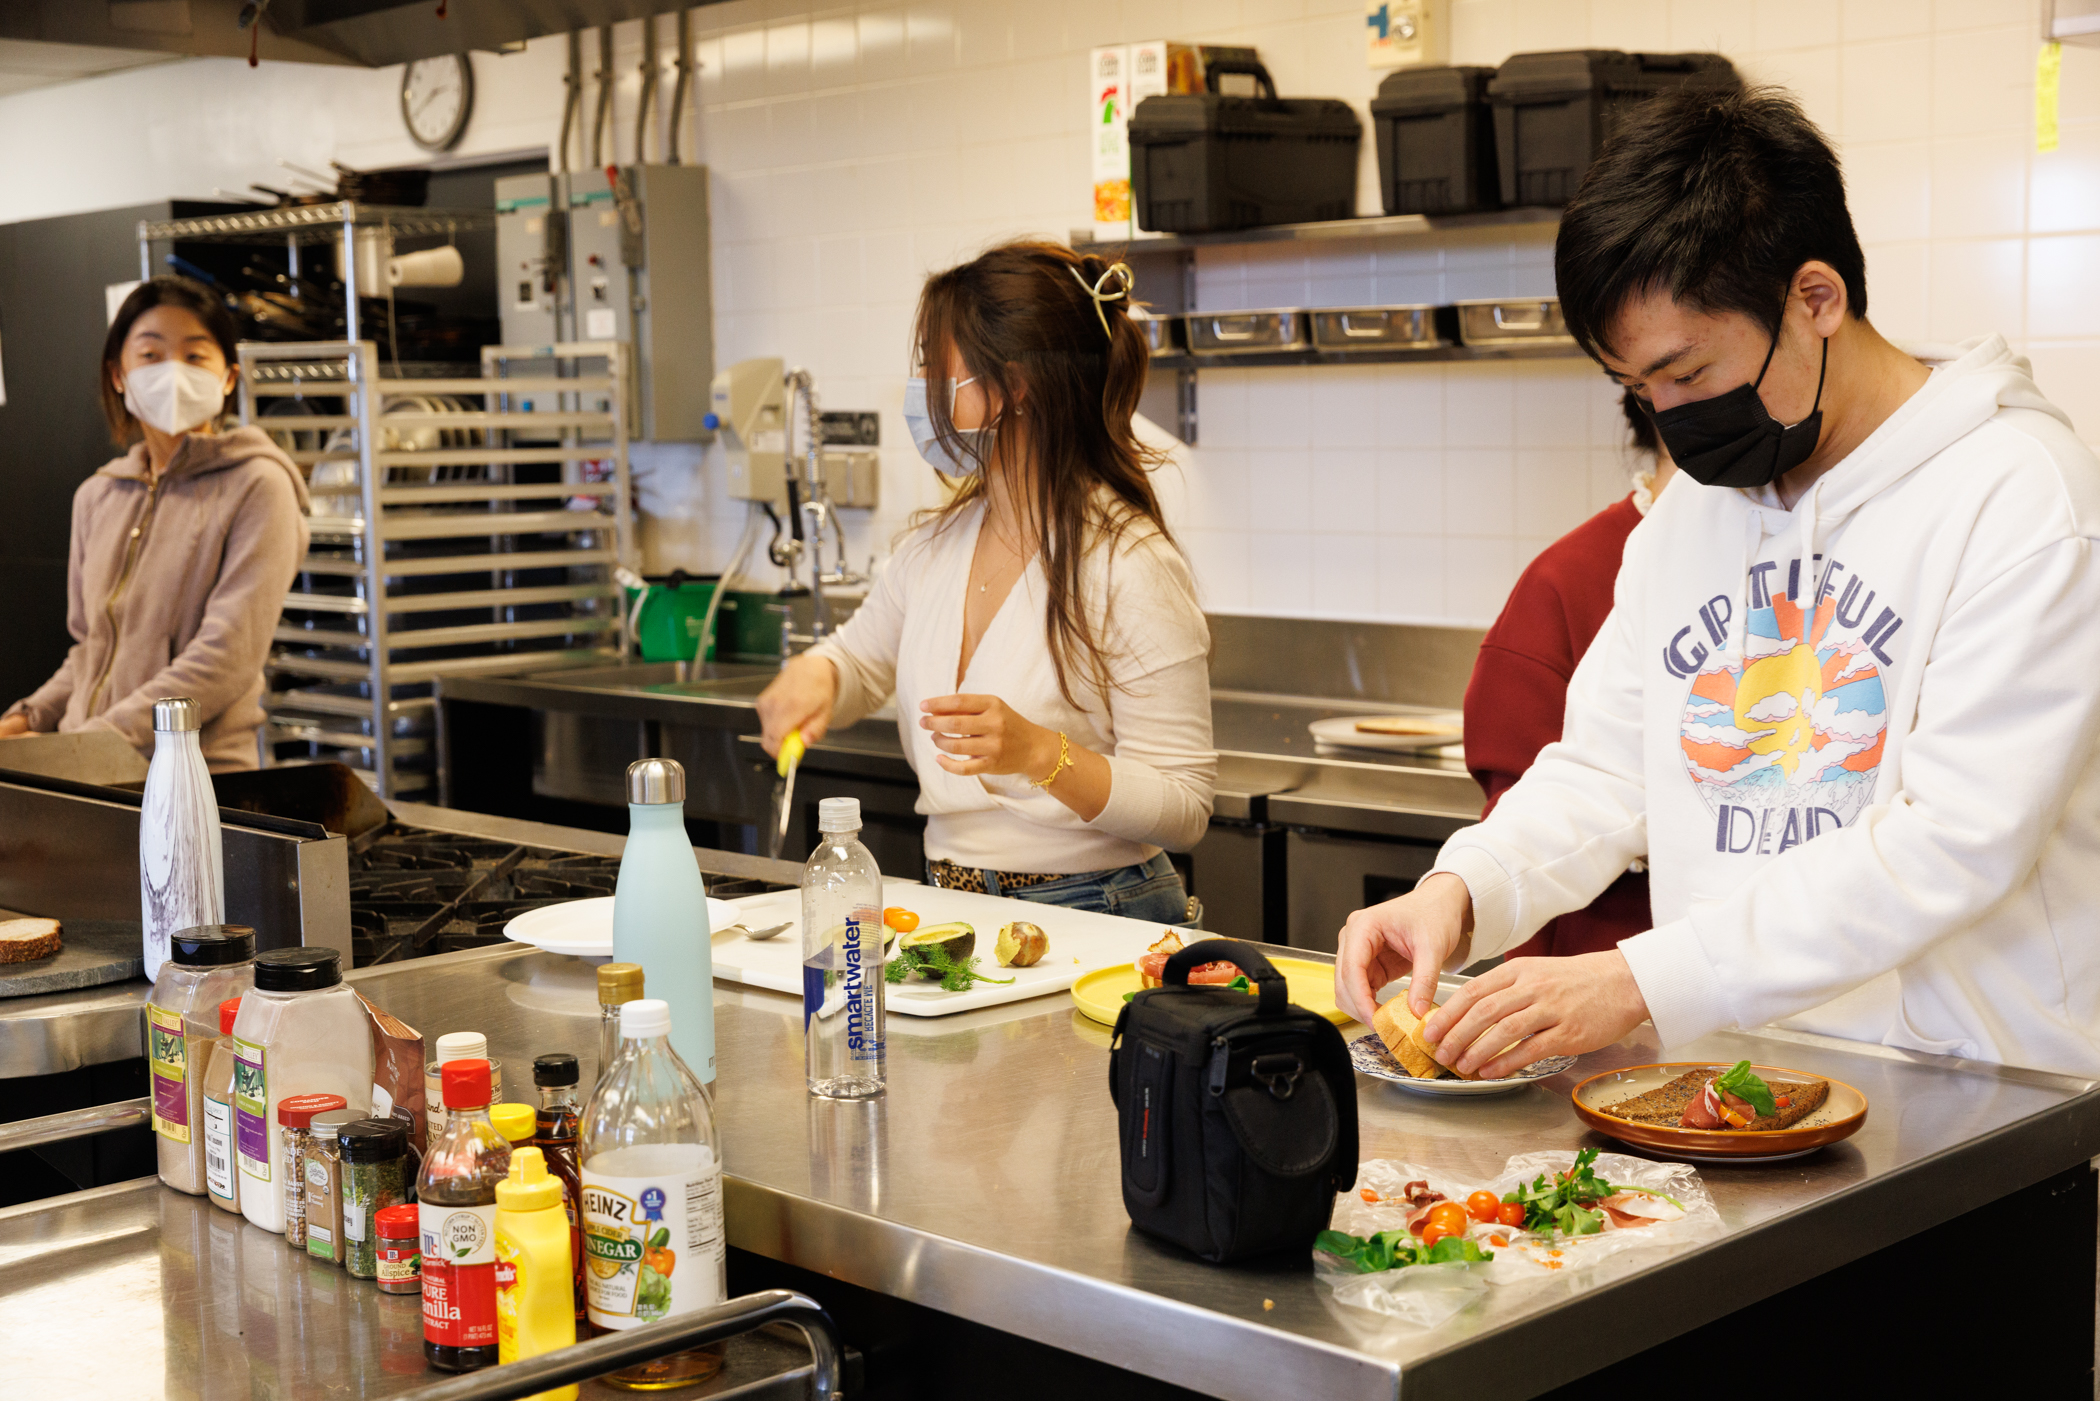 Students working together in a kitchen